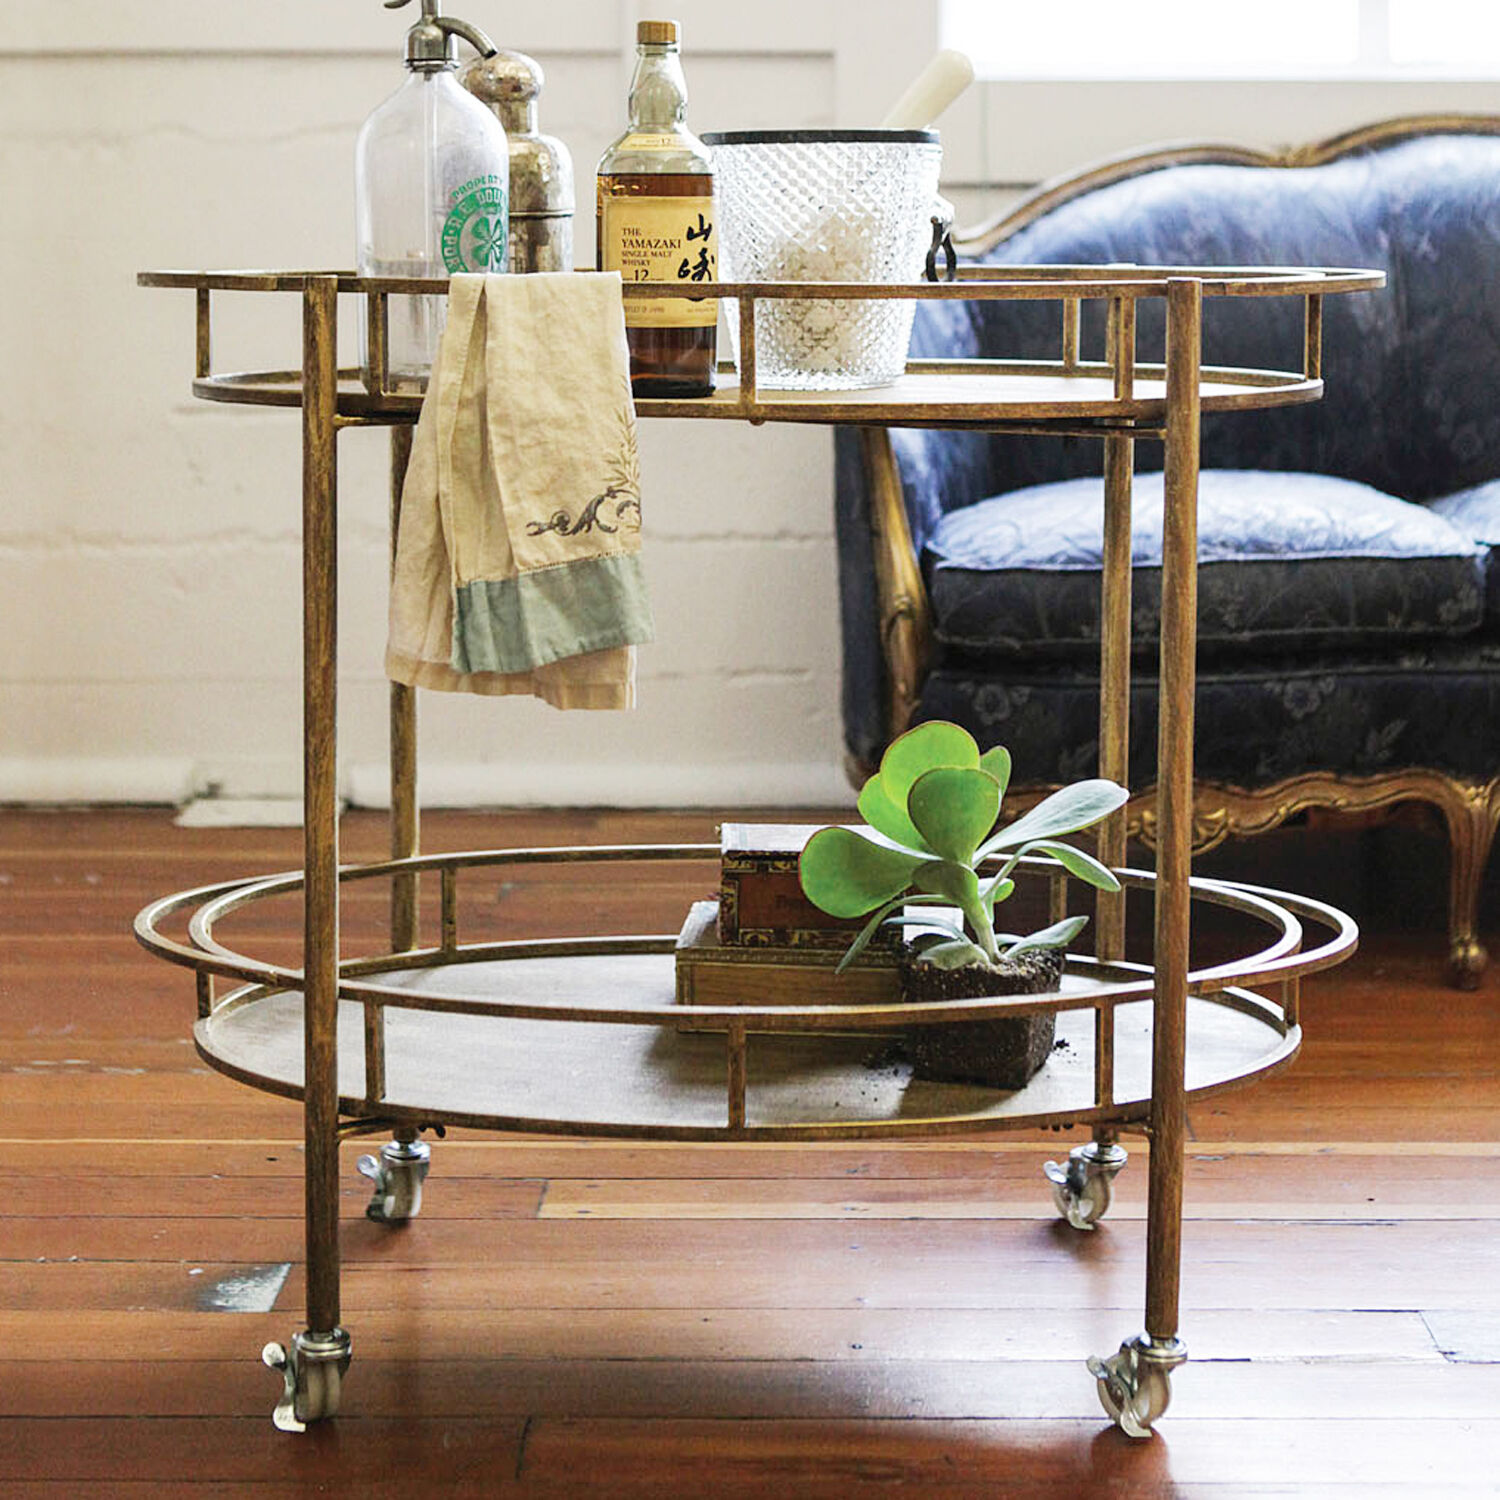 Black Creative Co-op Metal 2-Tier Clover Shaped Bar Cart on Caster Wheels Cabinets and Shelf Units